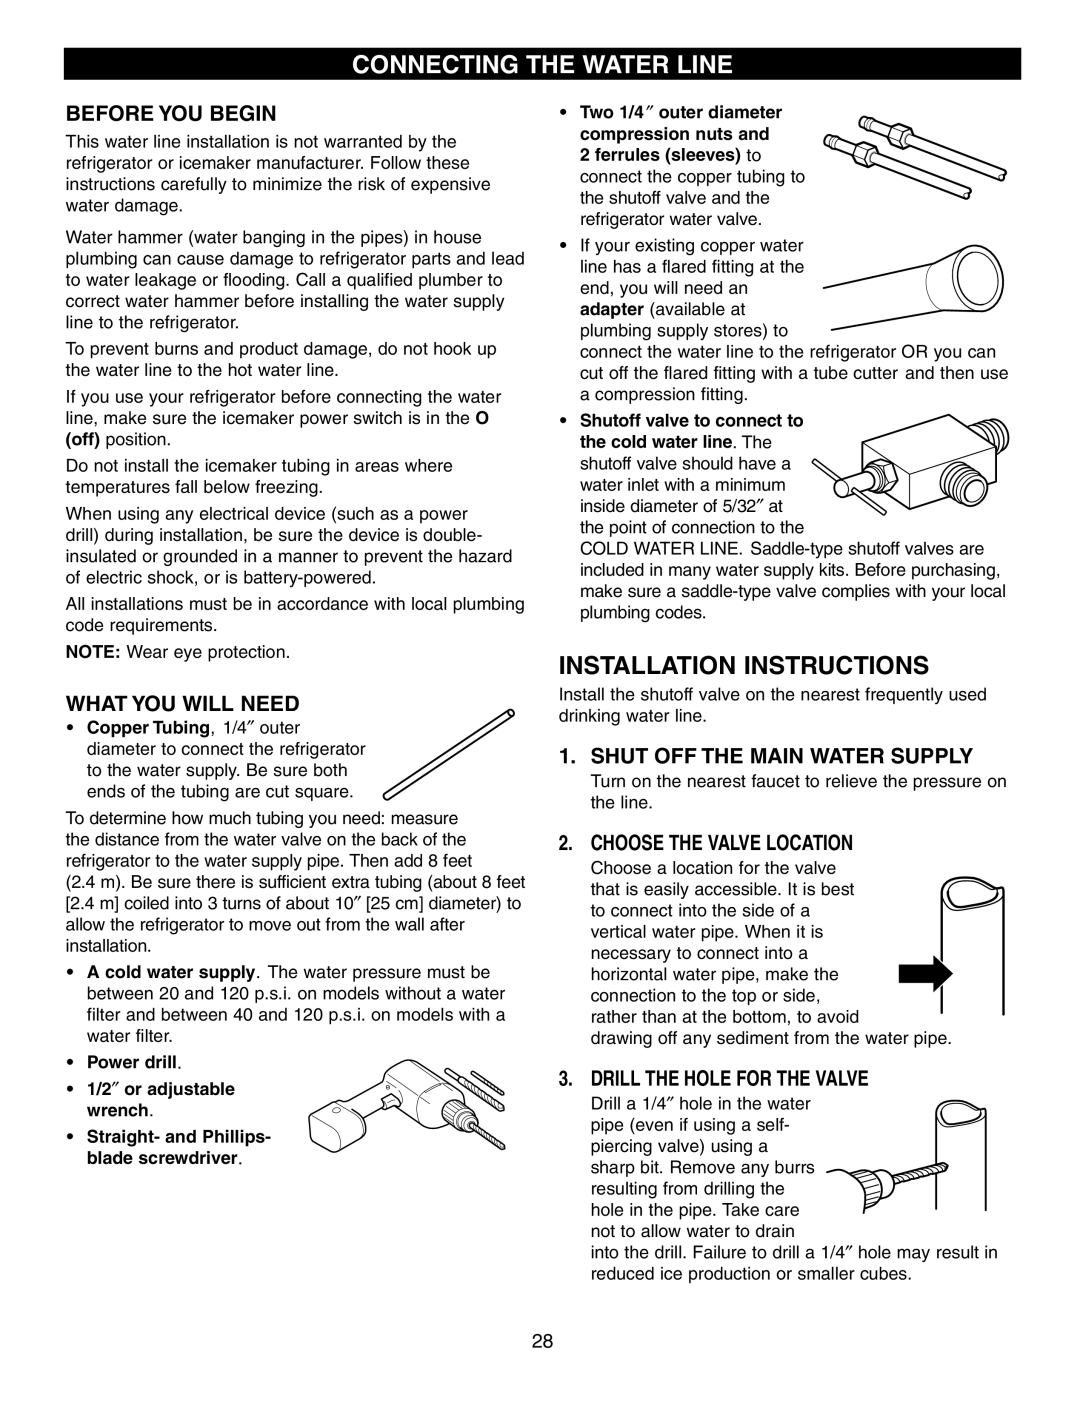 LG Electronics LFC25760 manual Connecting The Water Line, Installation Instructions, Before You Begin, What You Will Need 